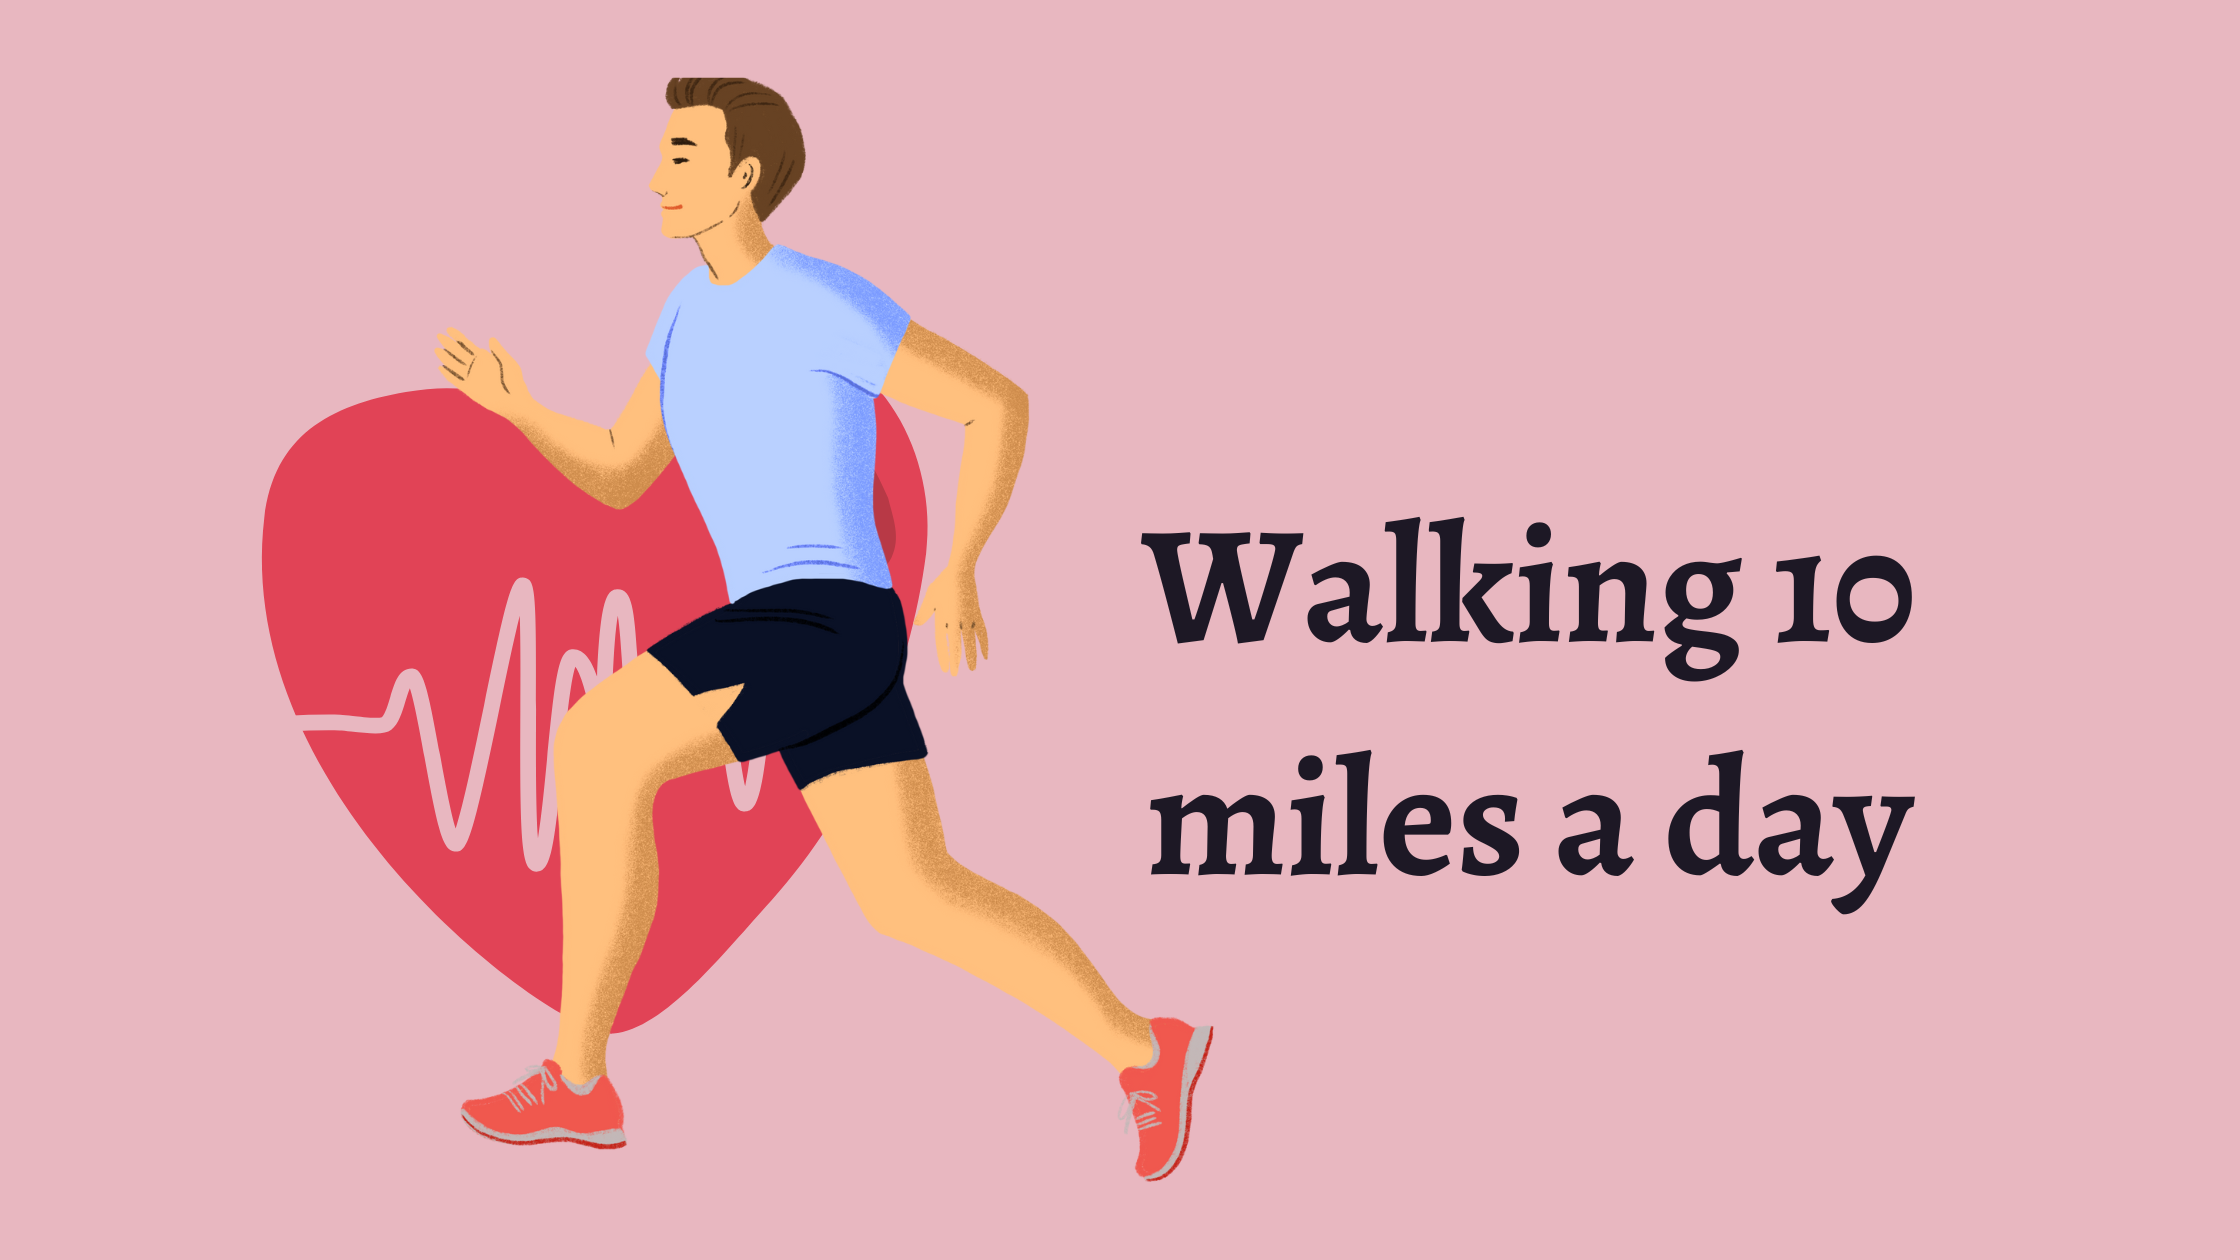 Walking 10 miles a day